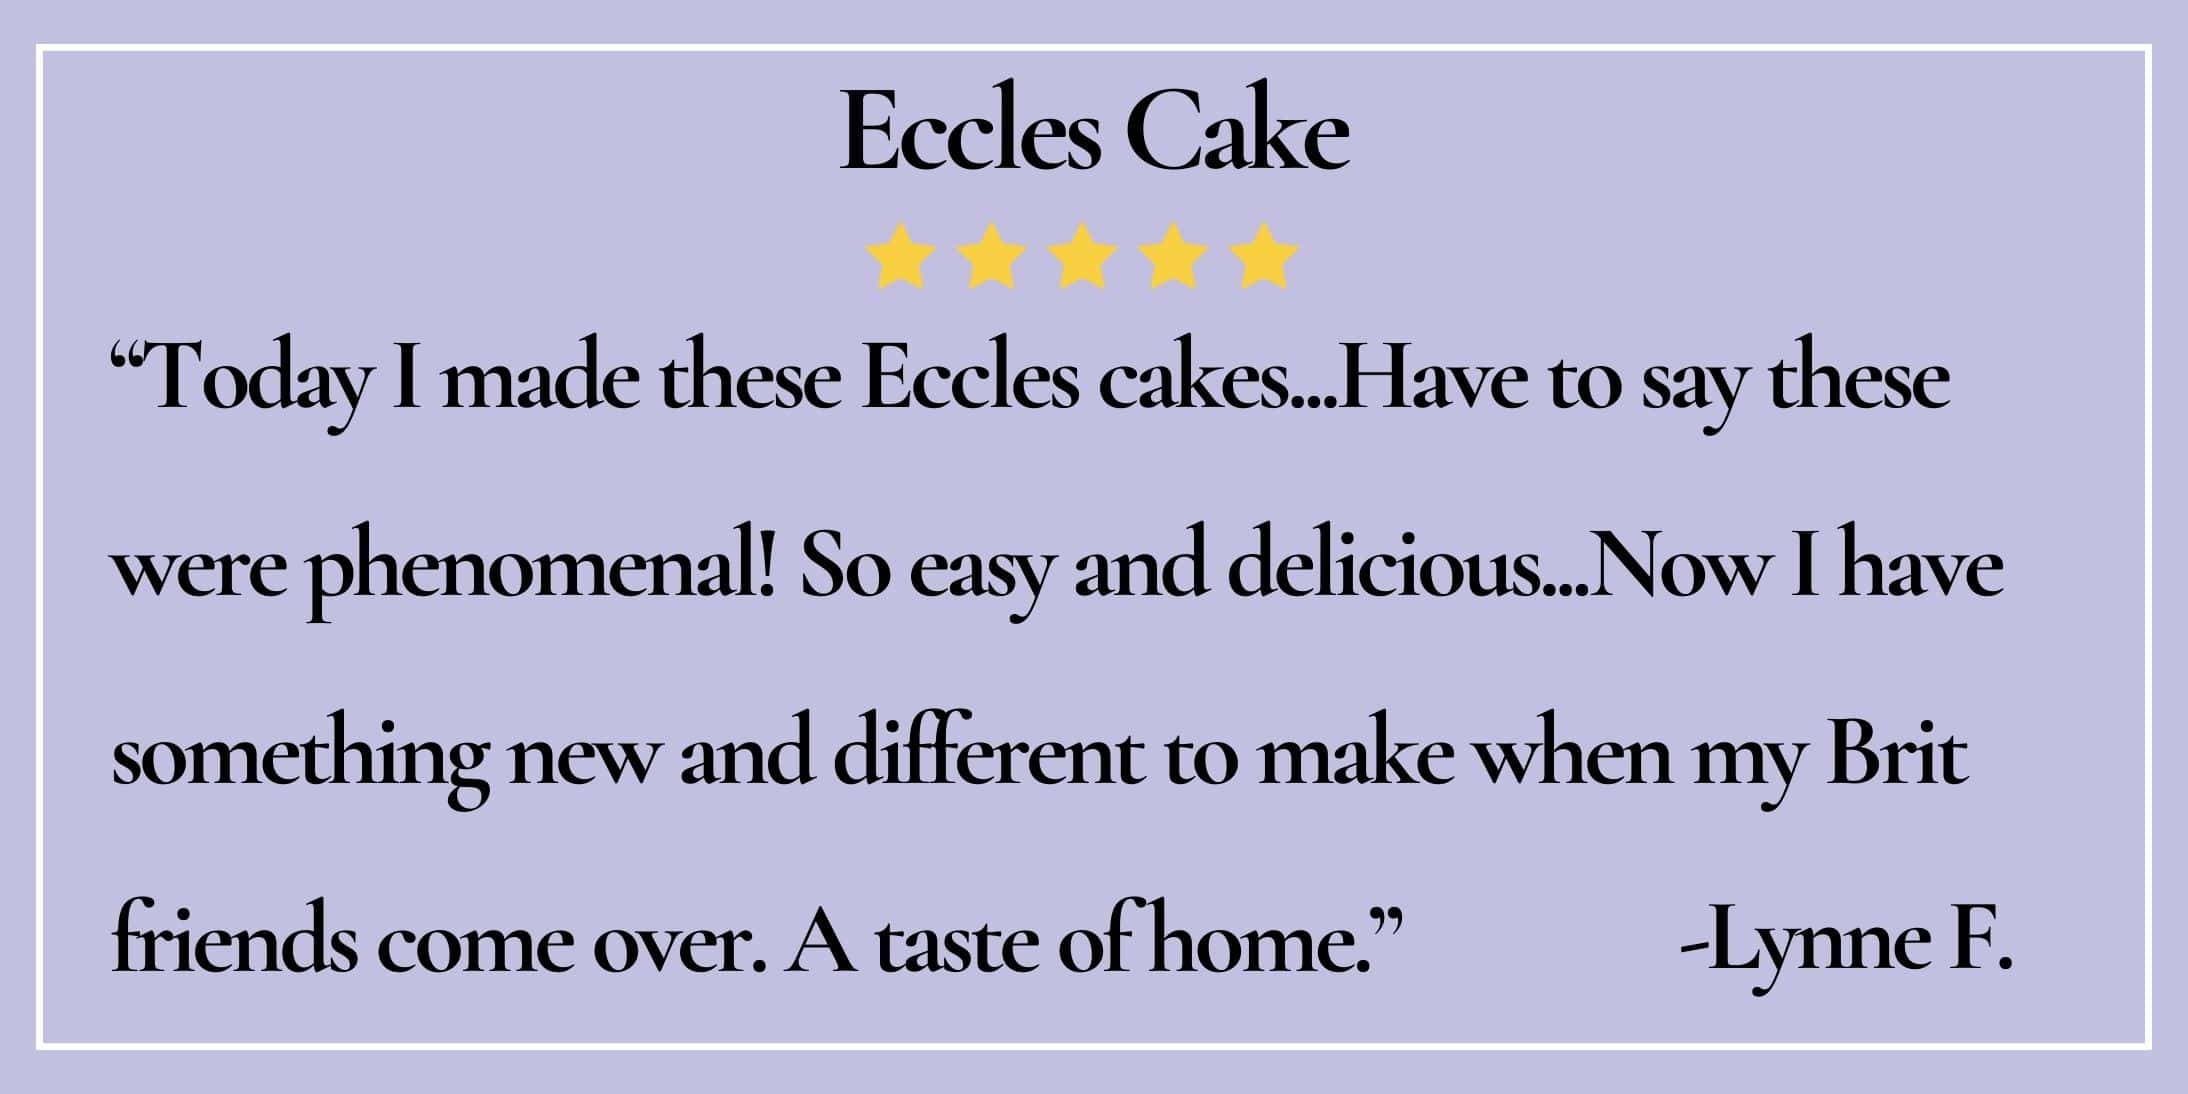 text box with paraphrase: Today I made these Eccles cakes...Have to say these were phenomenal! So easy and delicious.-Lynne F.